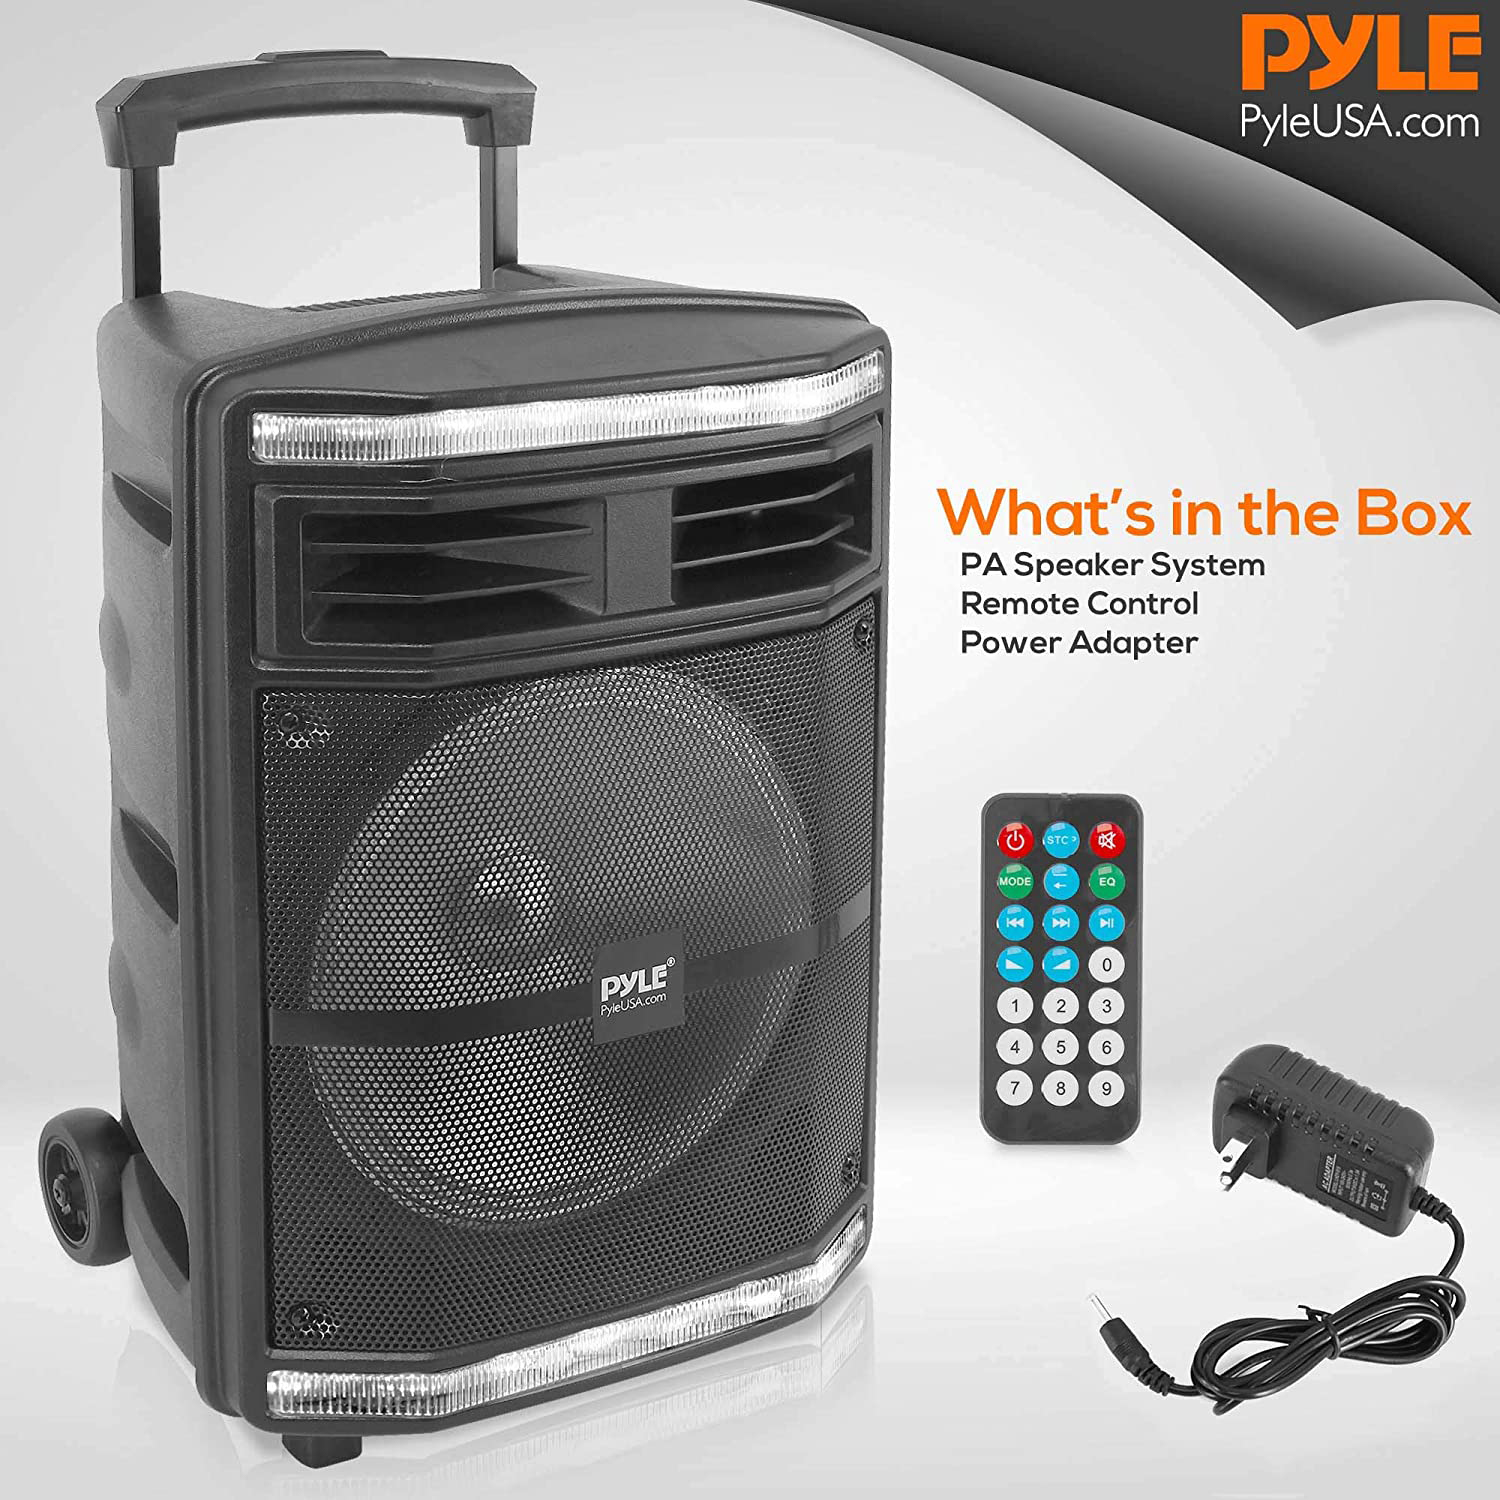 Pyle PPHP1044B Portable Bluetooth Speaker System with Flashing Party Lights - image 2 of 7